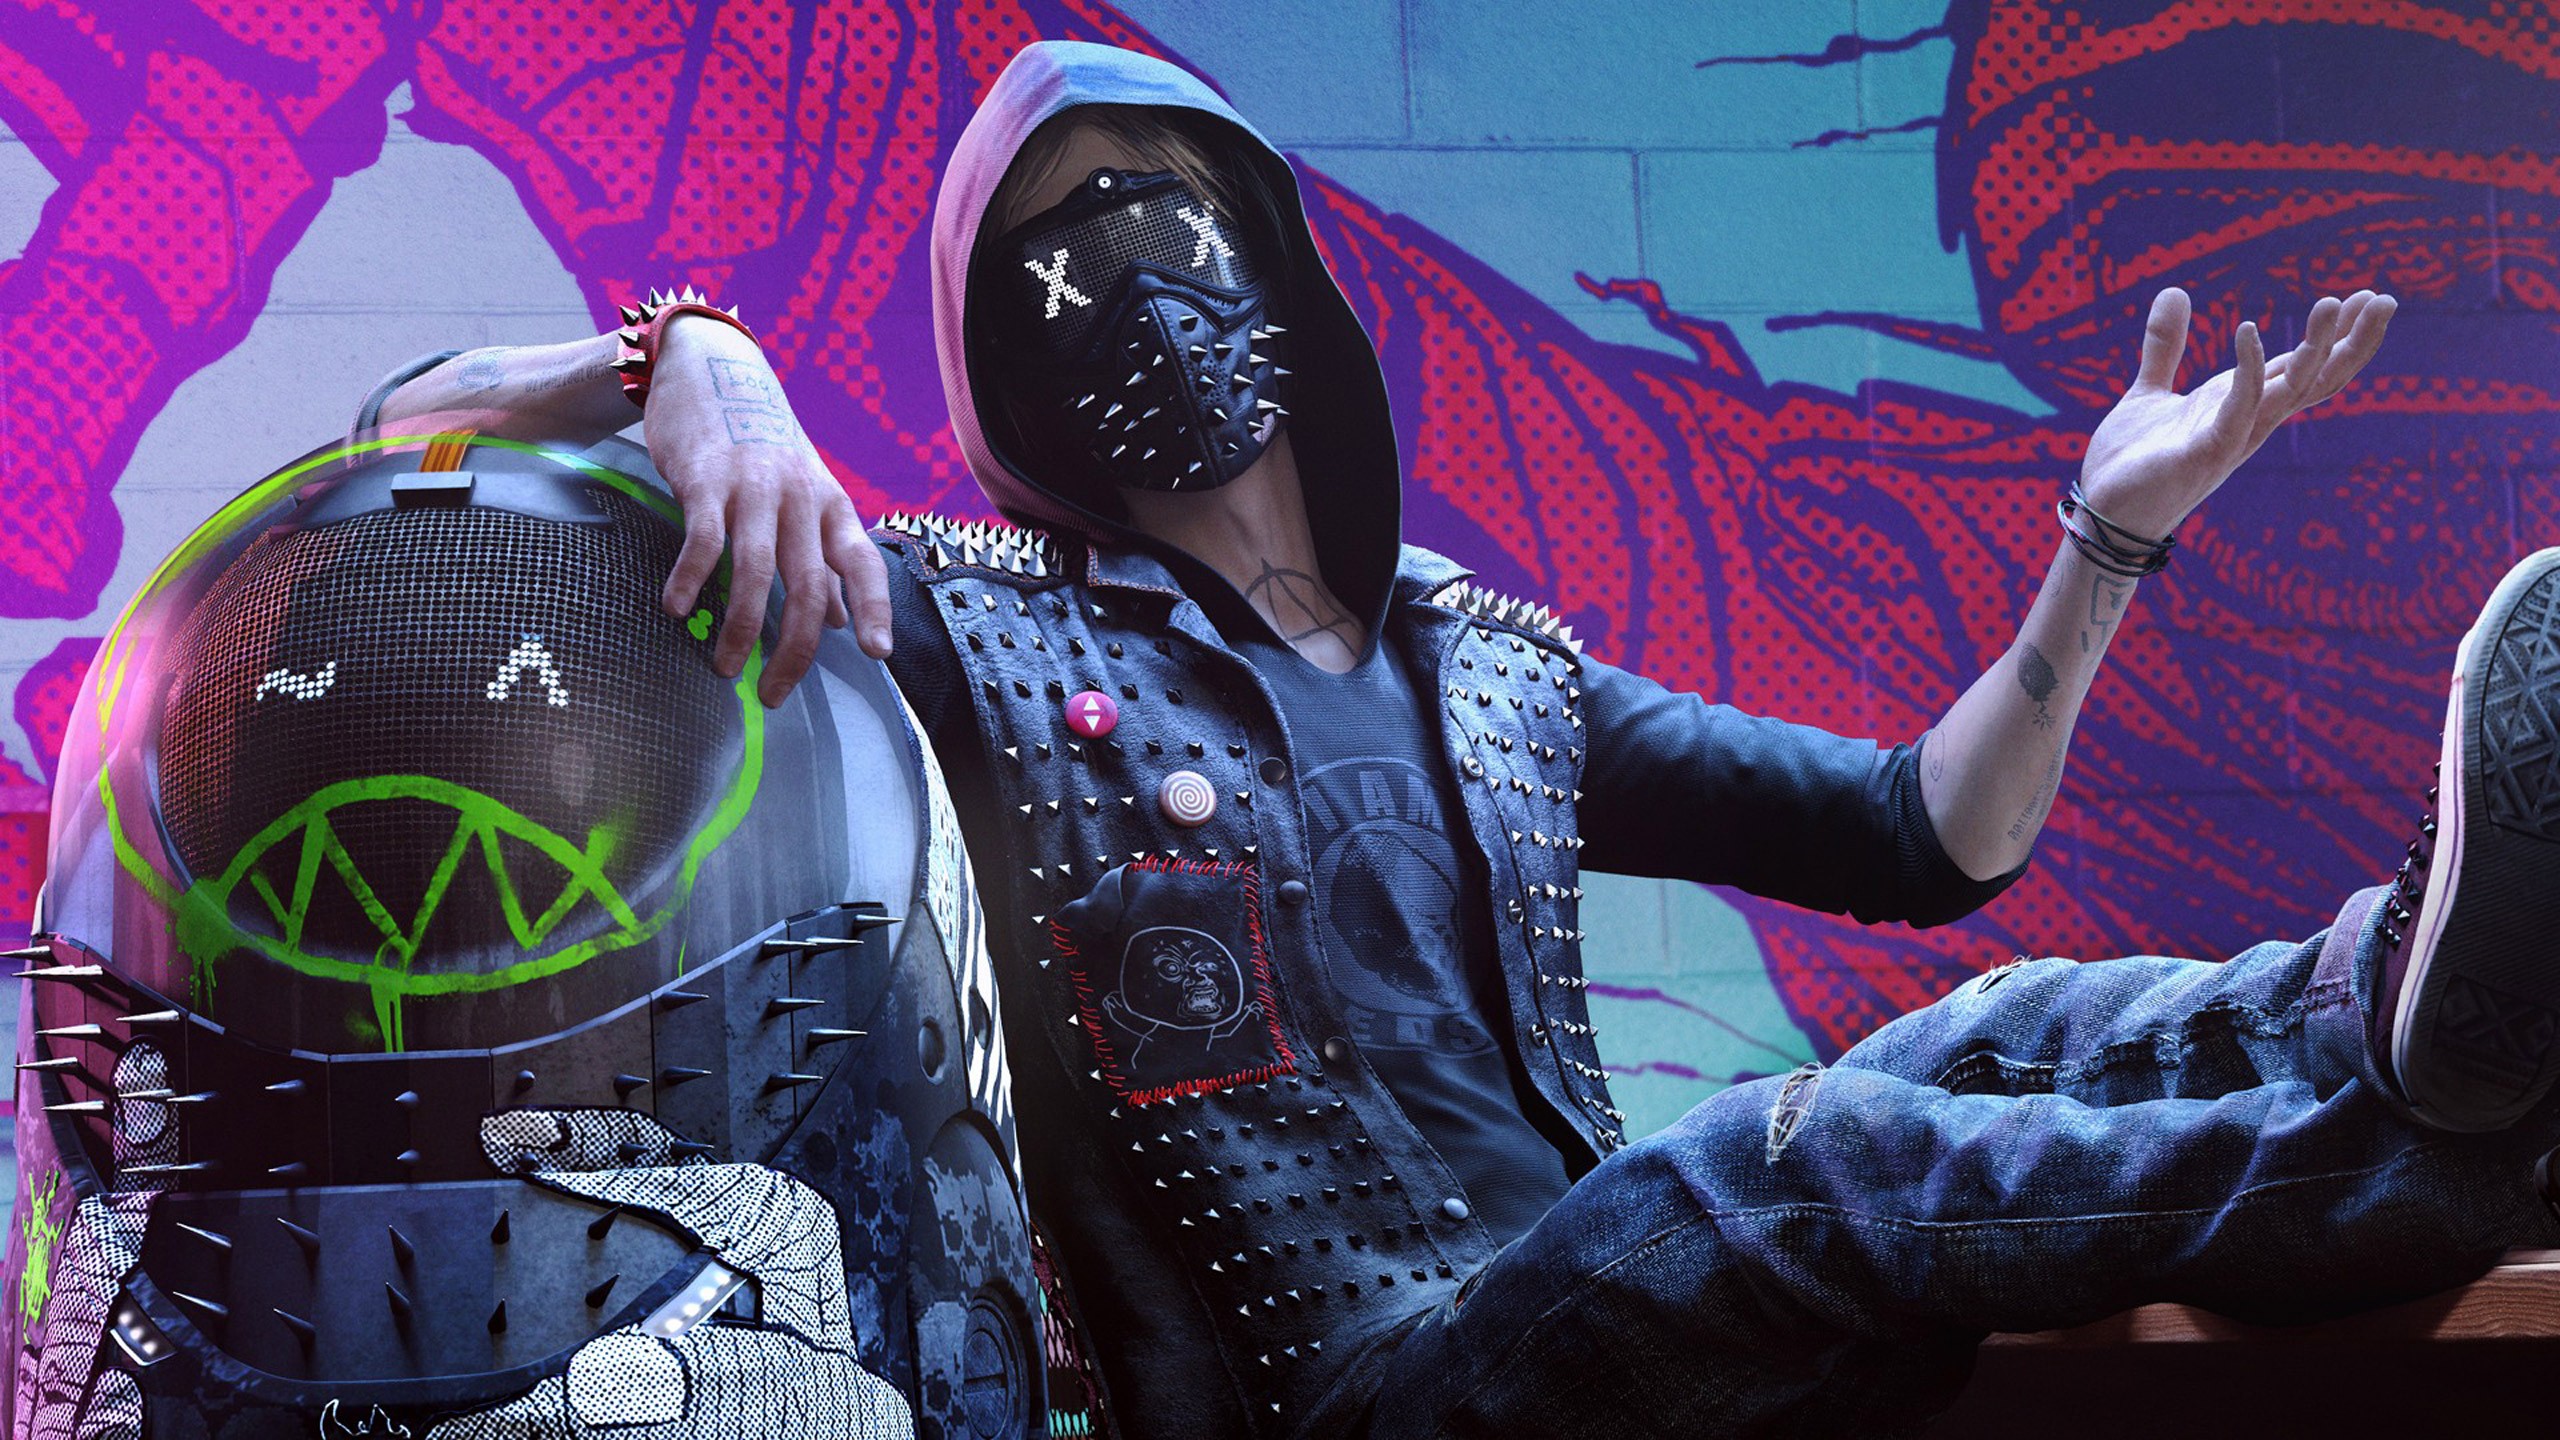 watch dogs 2 download free